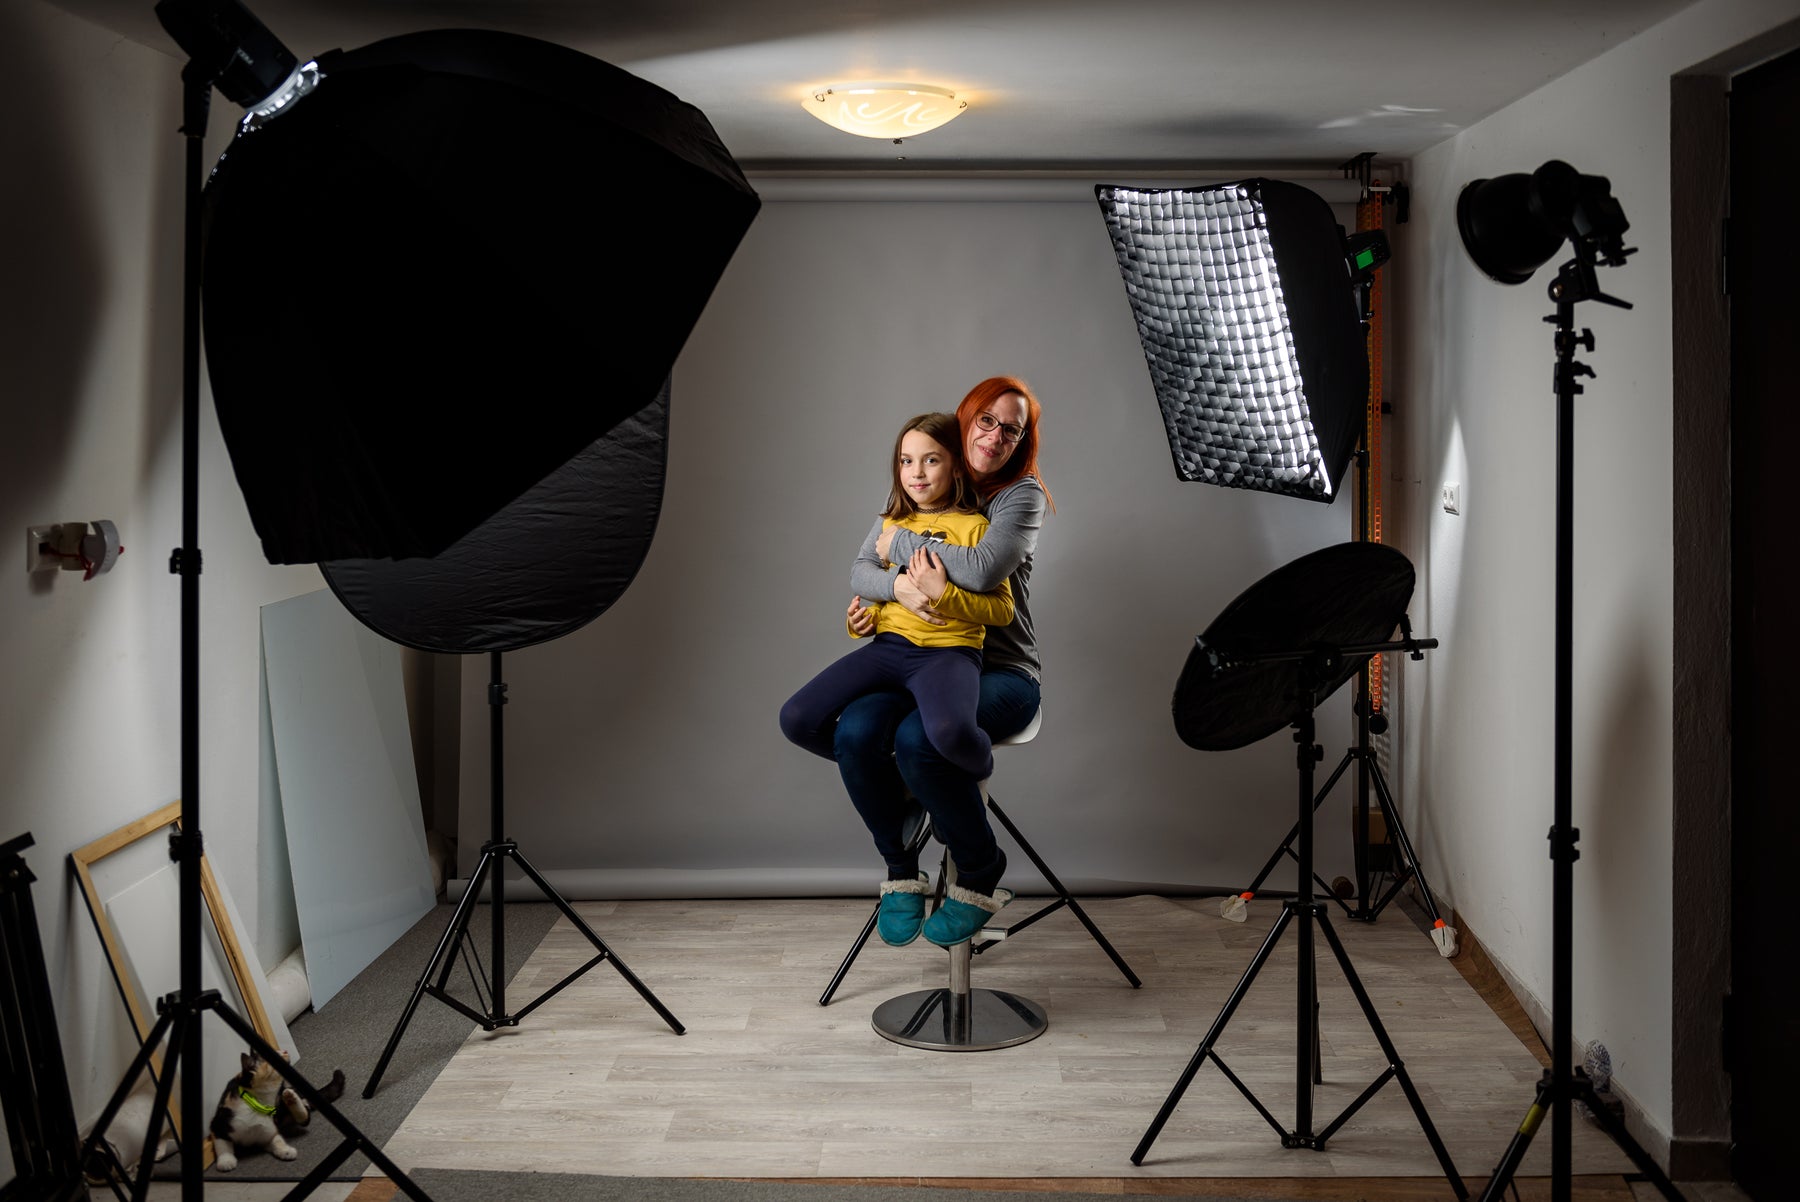 10 Essential Tips for Setting Up Your First Home Photo Studio